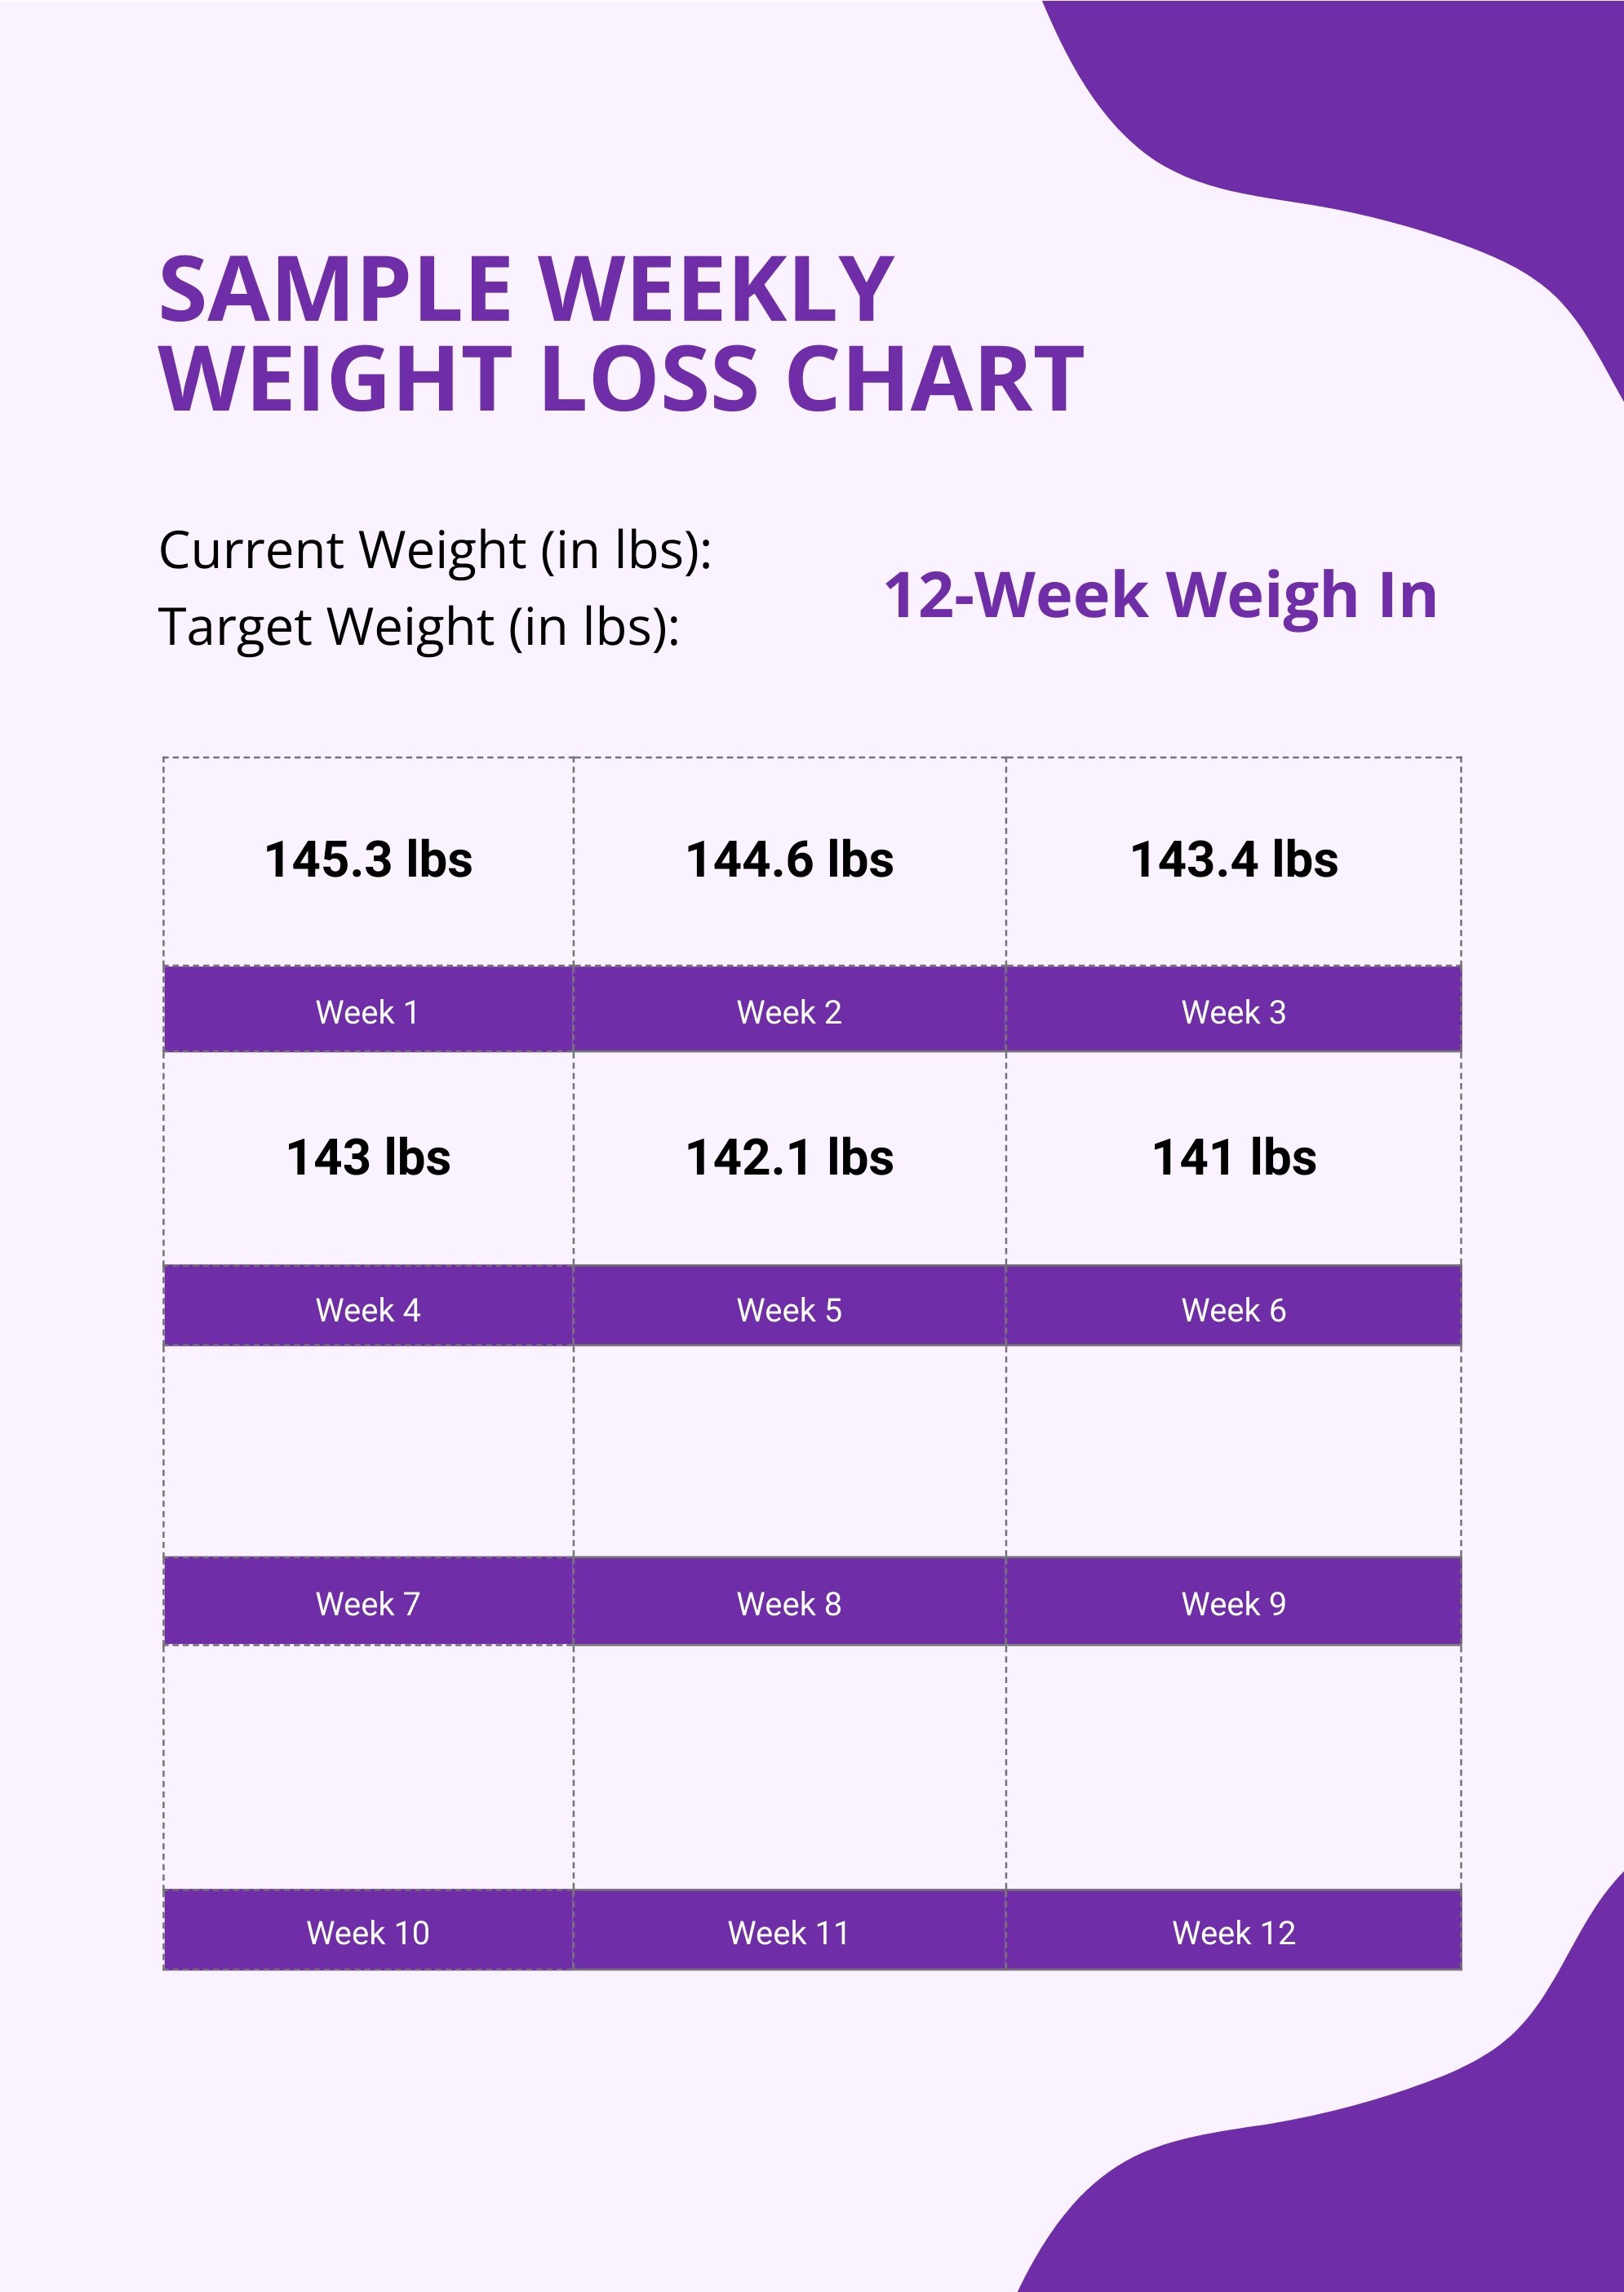 Free Sample Weekly Weight Loss Chart in PDF, Illustrator